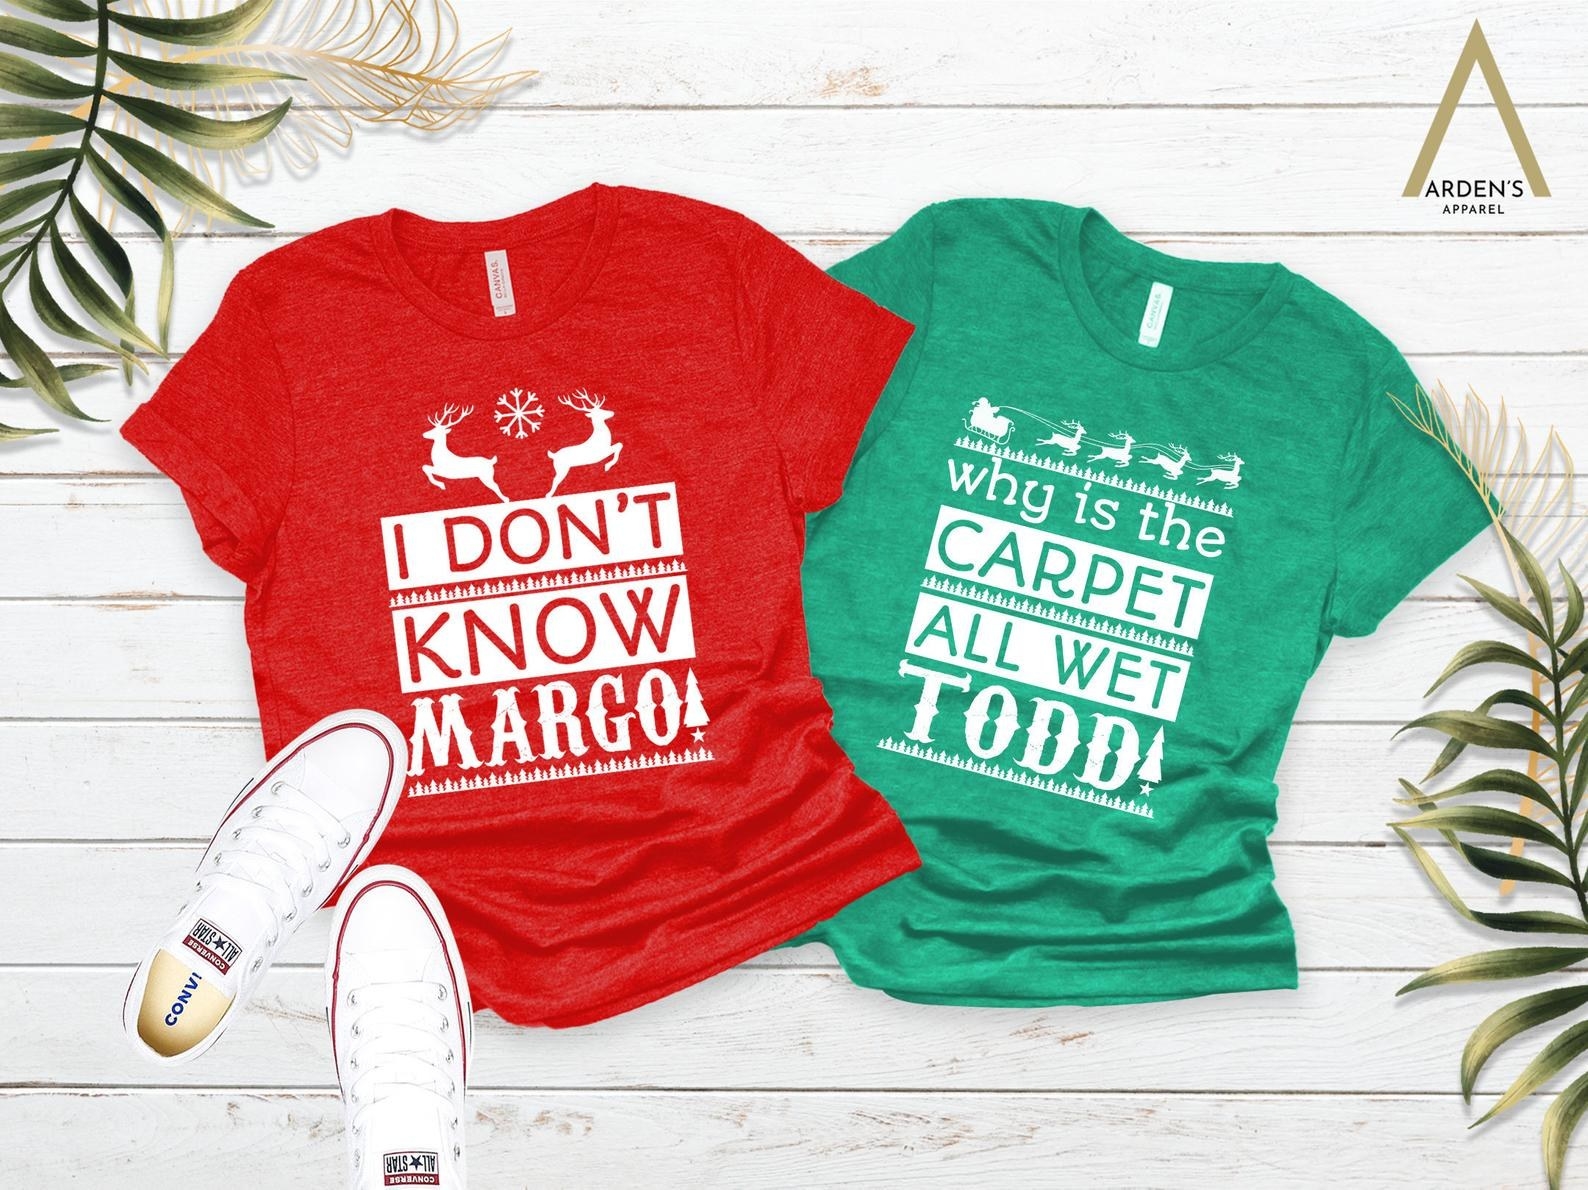 a red tee that says &quot;I don&#x27;t know margo&quot; and a green tee that says &quot;why is the carpet all wet todd&quot;